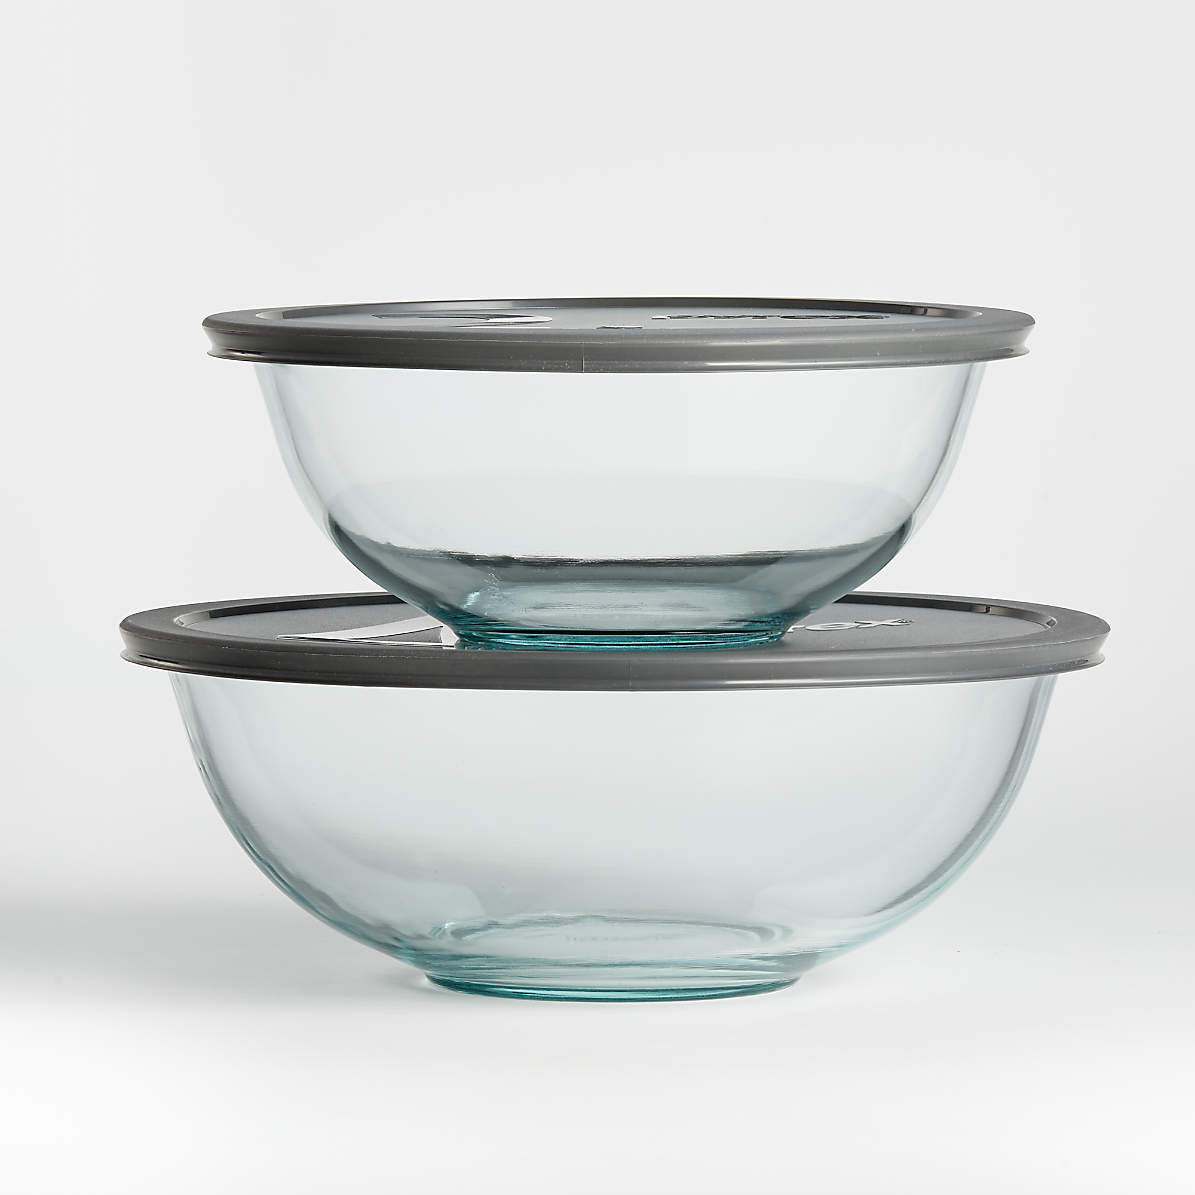 https://cb.scene7.com/is/image/Crate/PyrexGlassBowlsWGreyLidsS2SHS20/$web_pdp_main_carousel_zoom_med$/191202173357/pyrex-glass-bowls-with-grey-lids-set-of-2.jpg